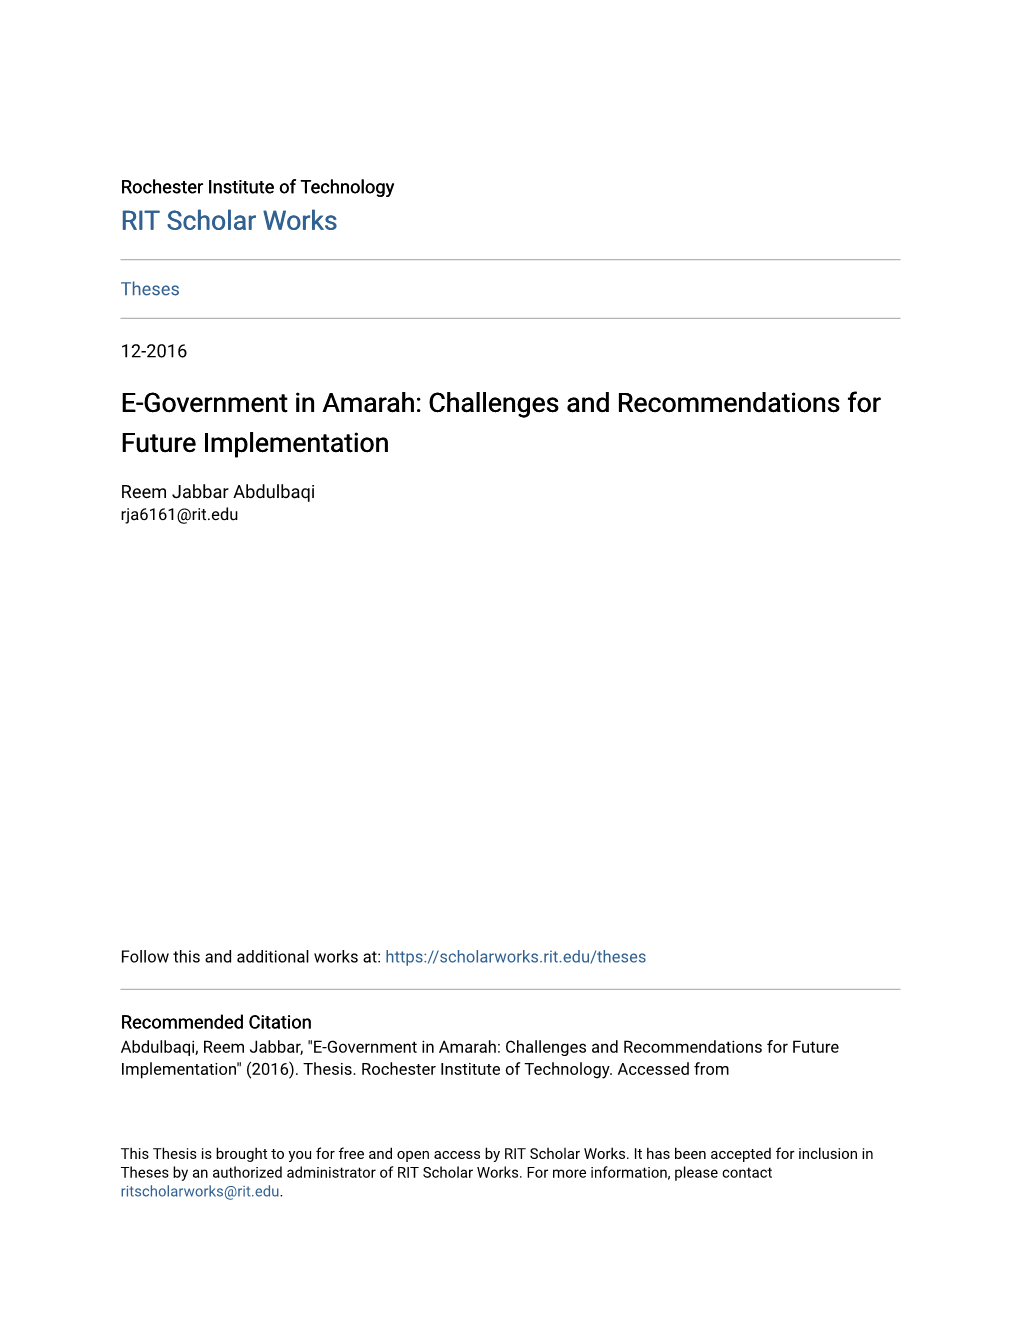 E-Government in Amarah: Challenges and Recommendations for Future Implementation